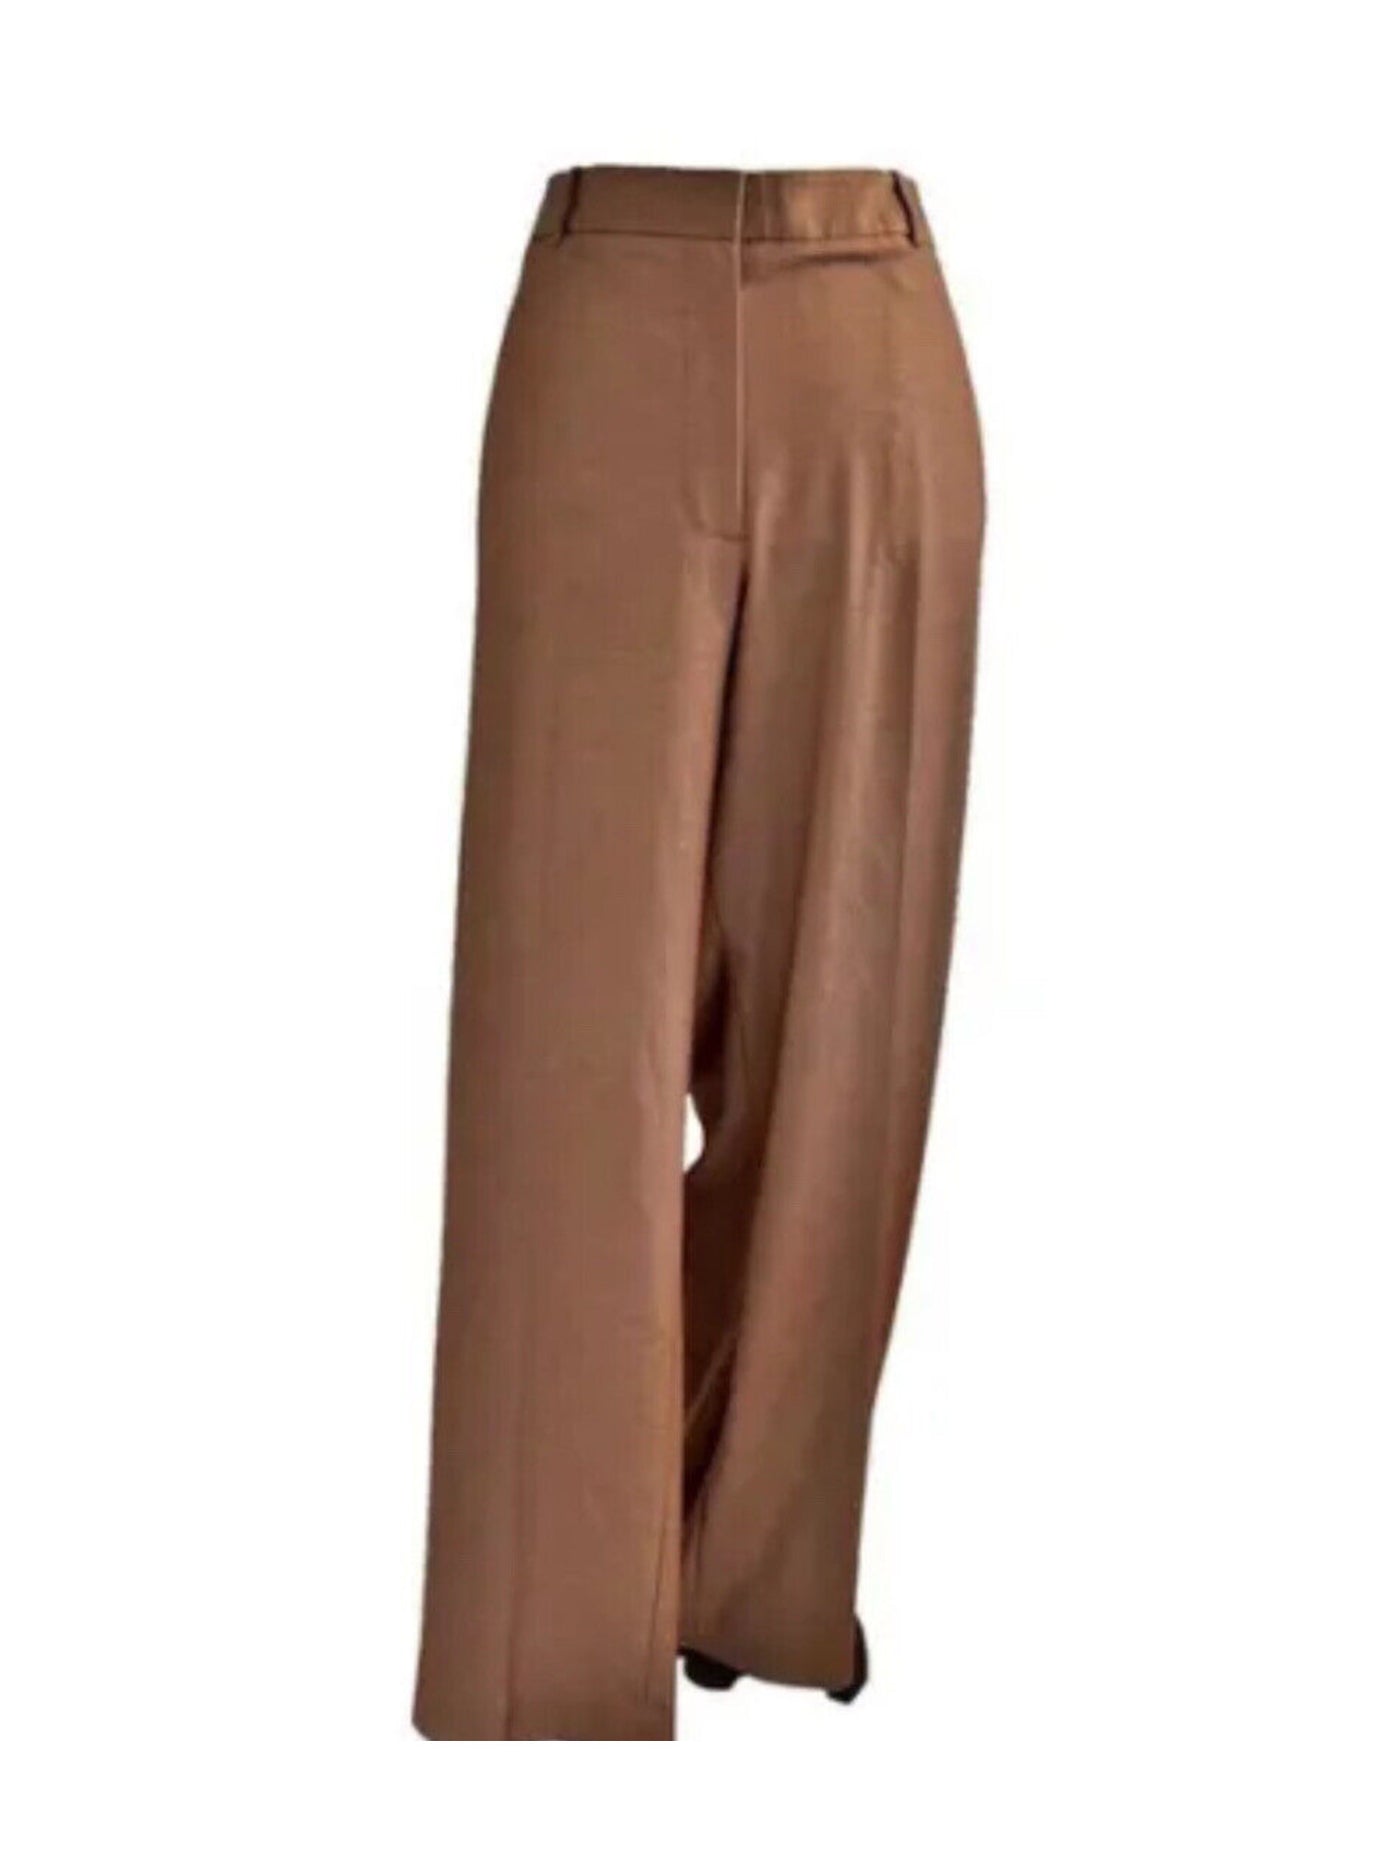 DKNY Womens Brown Zippered Pocketed Hook And Bar Closure Wear To Work Straight leg Pants 2